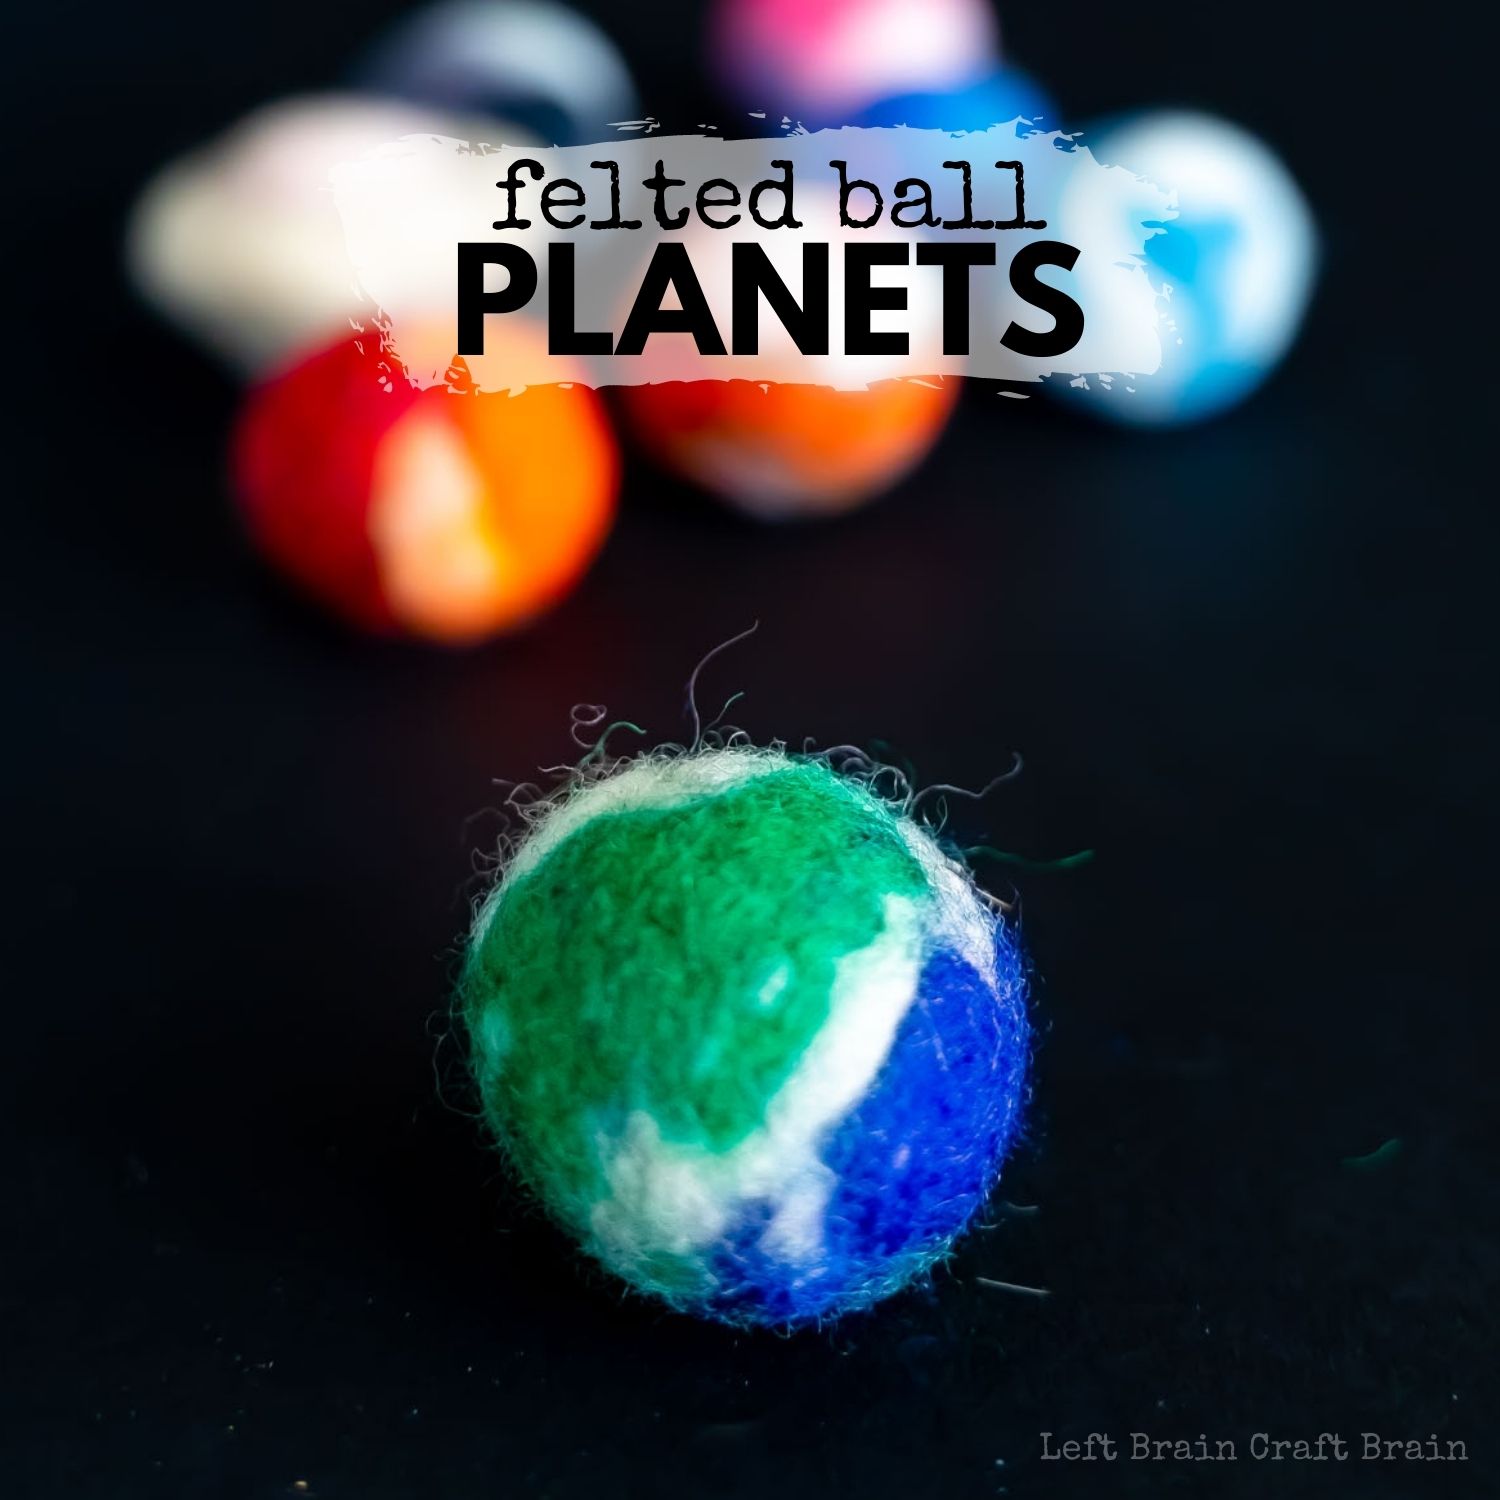 felted ball planets